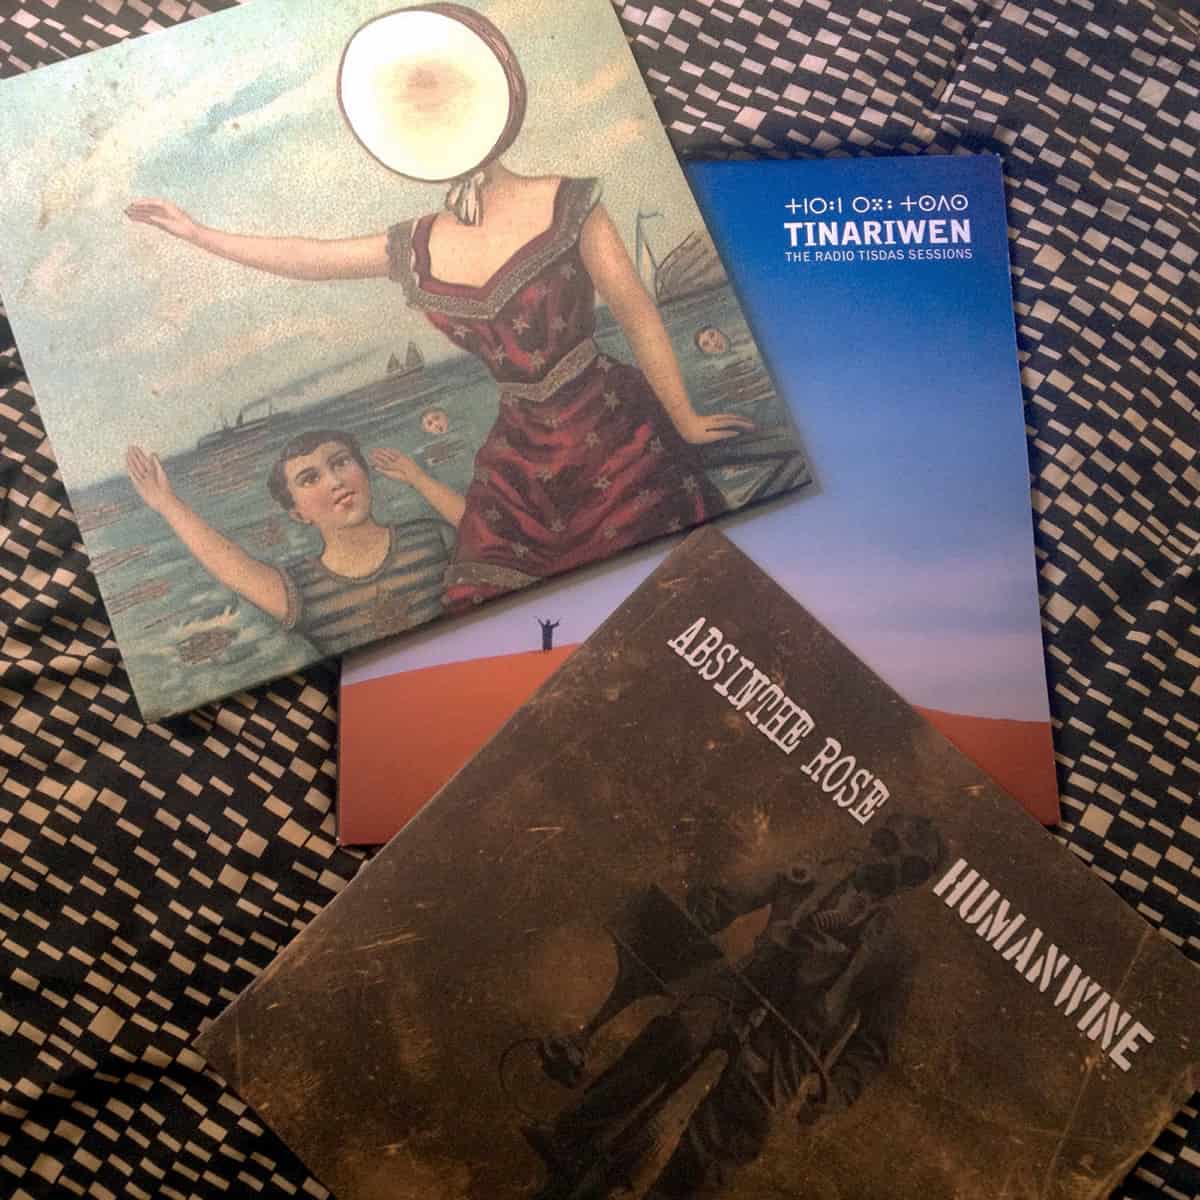 A photo of three vinyl albums, including In the Aeroplane Over the Sea by Neutral Milk Hotel and Humanwine by Absinthe Rose.